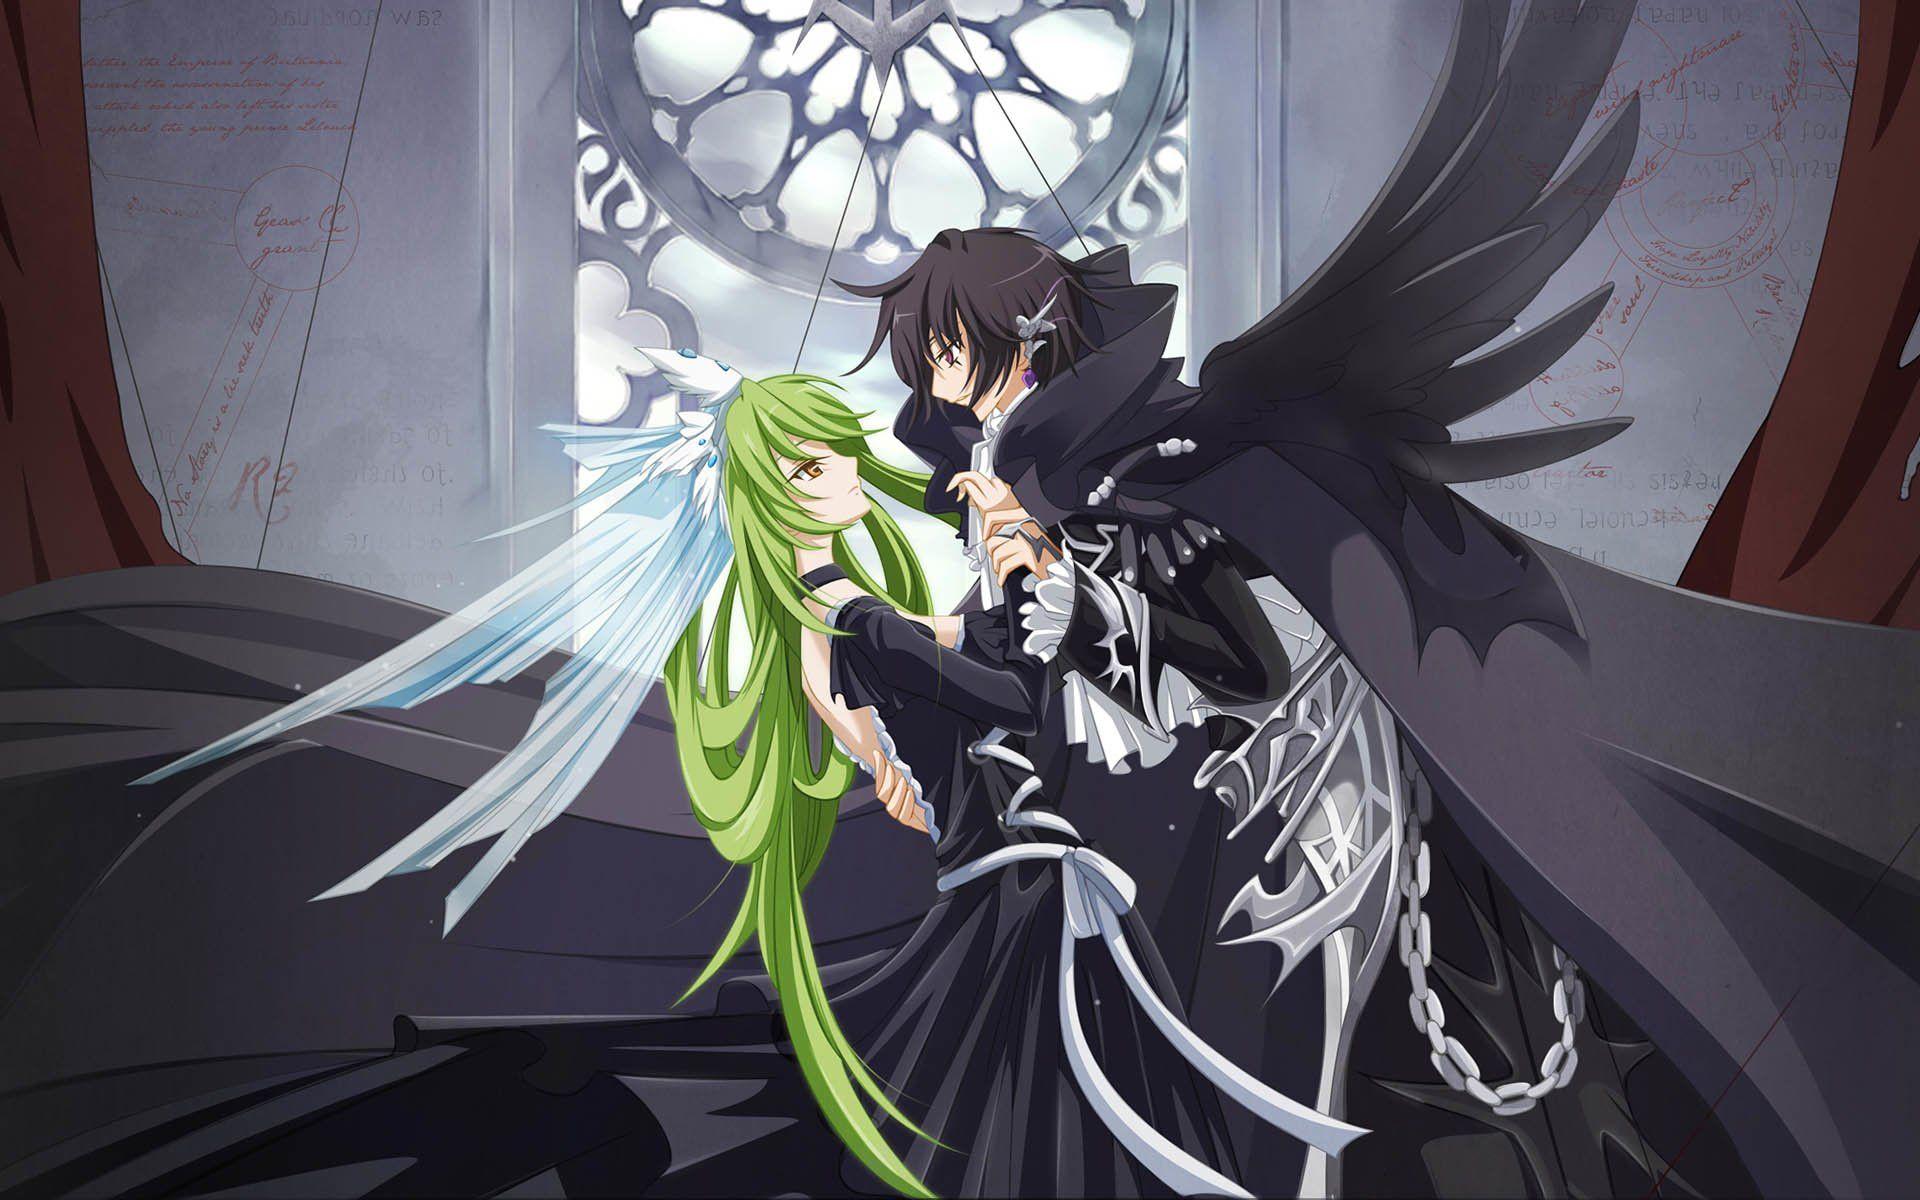 Lelouch X Cc Wallpapers Wallpaper Cave